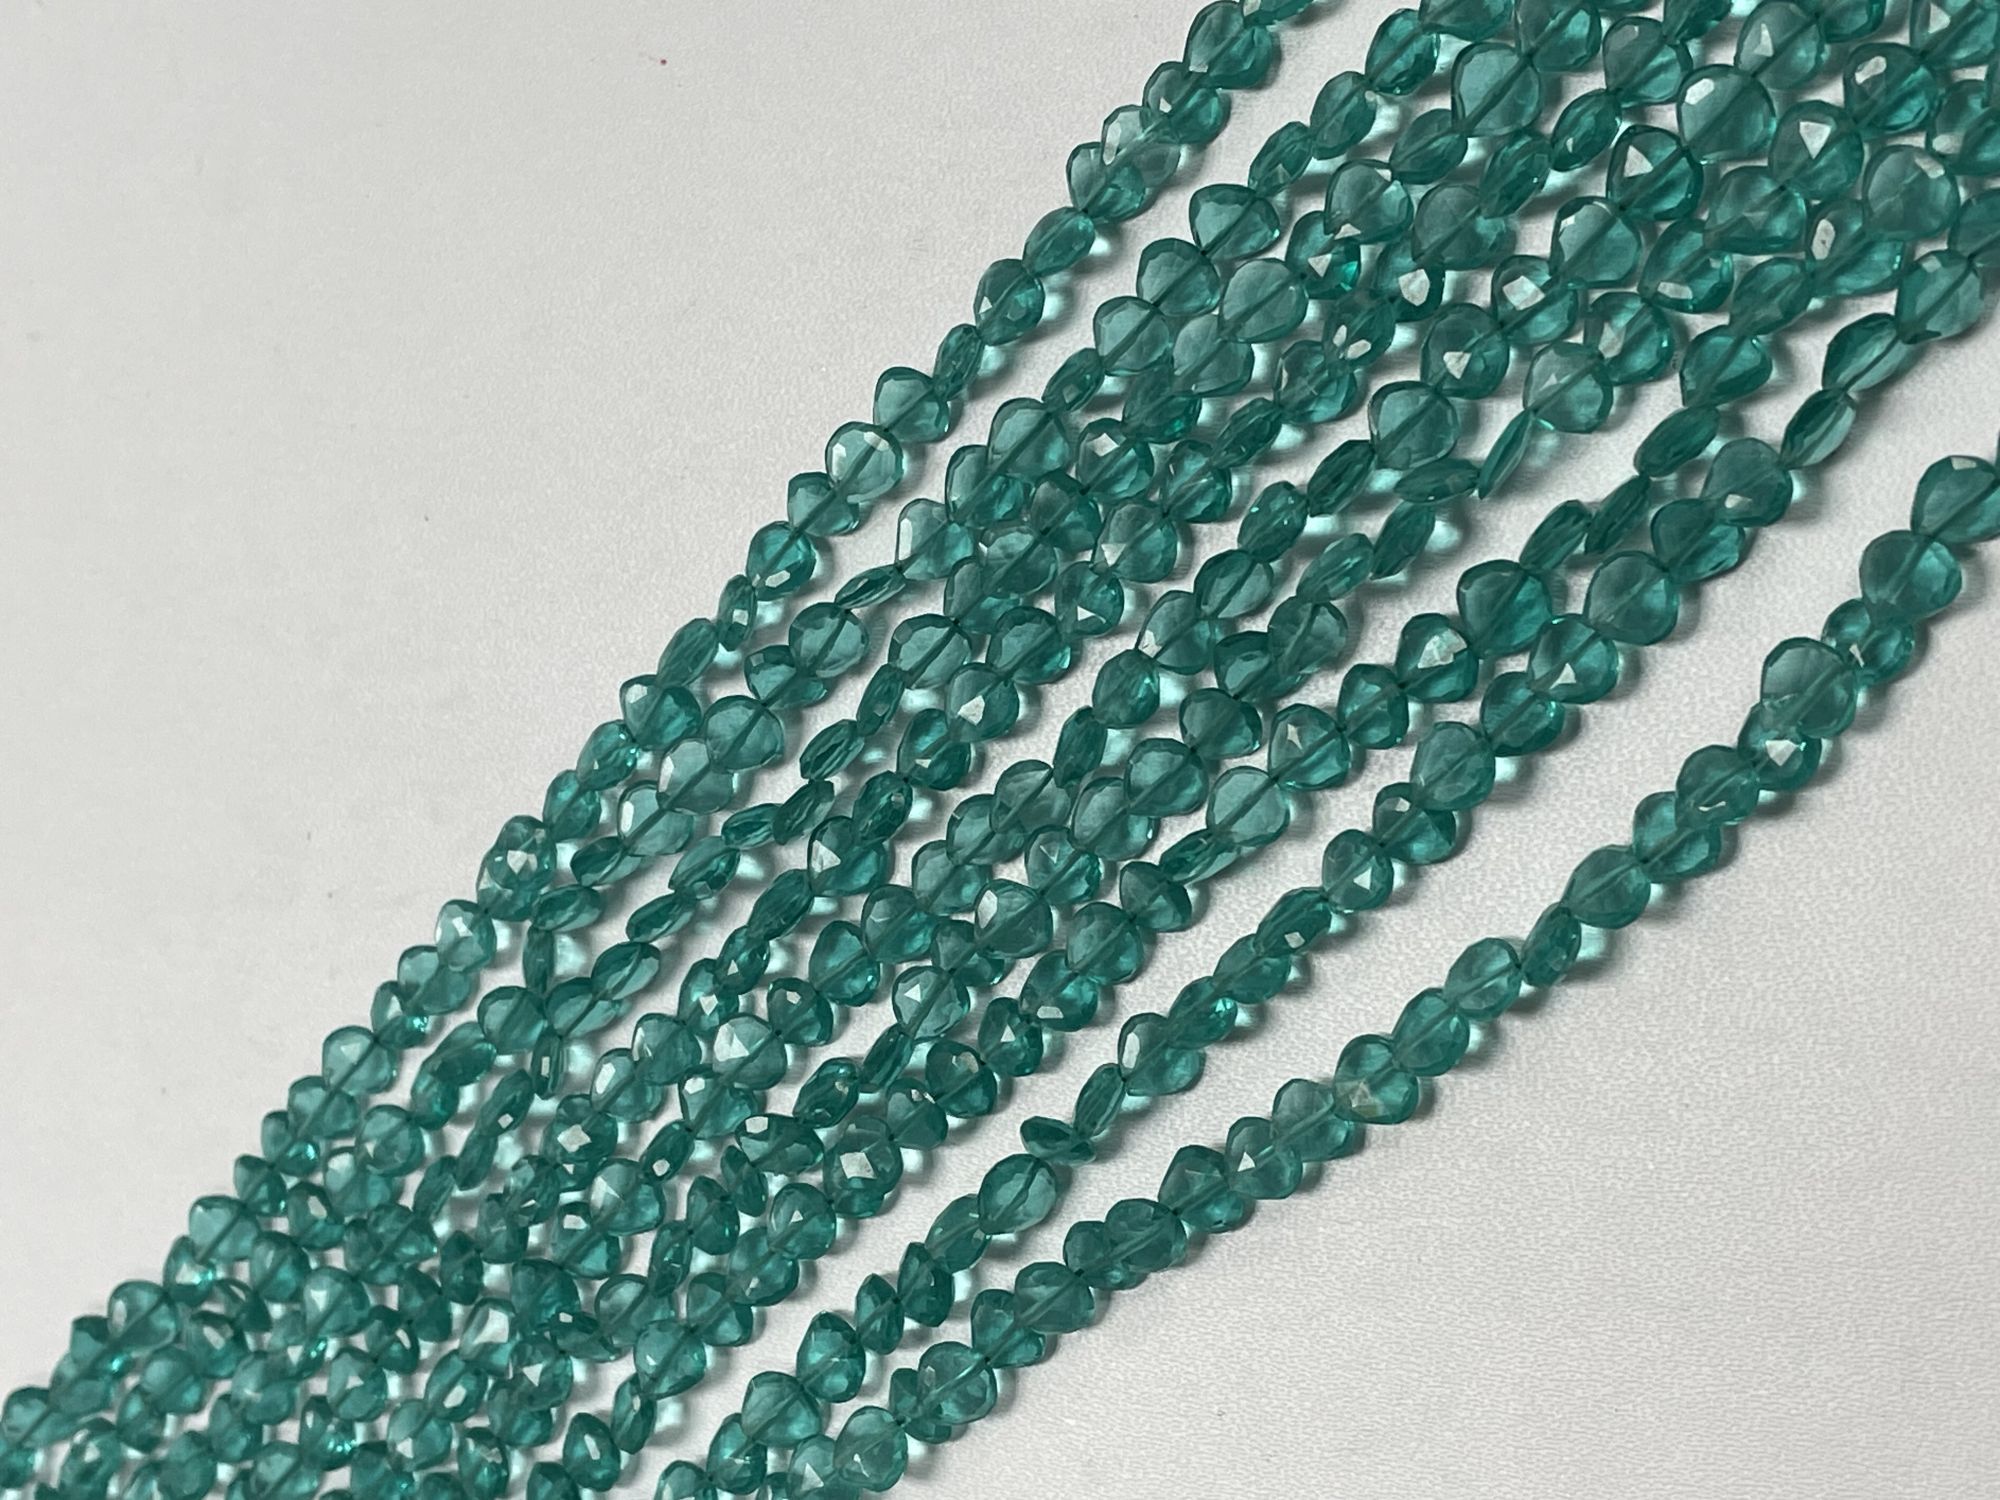 Teal Hydro Quartz Heart Straight Drill Faceted